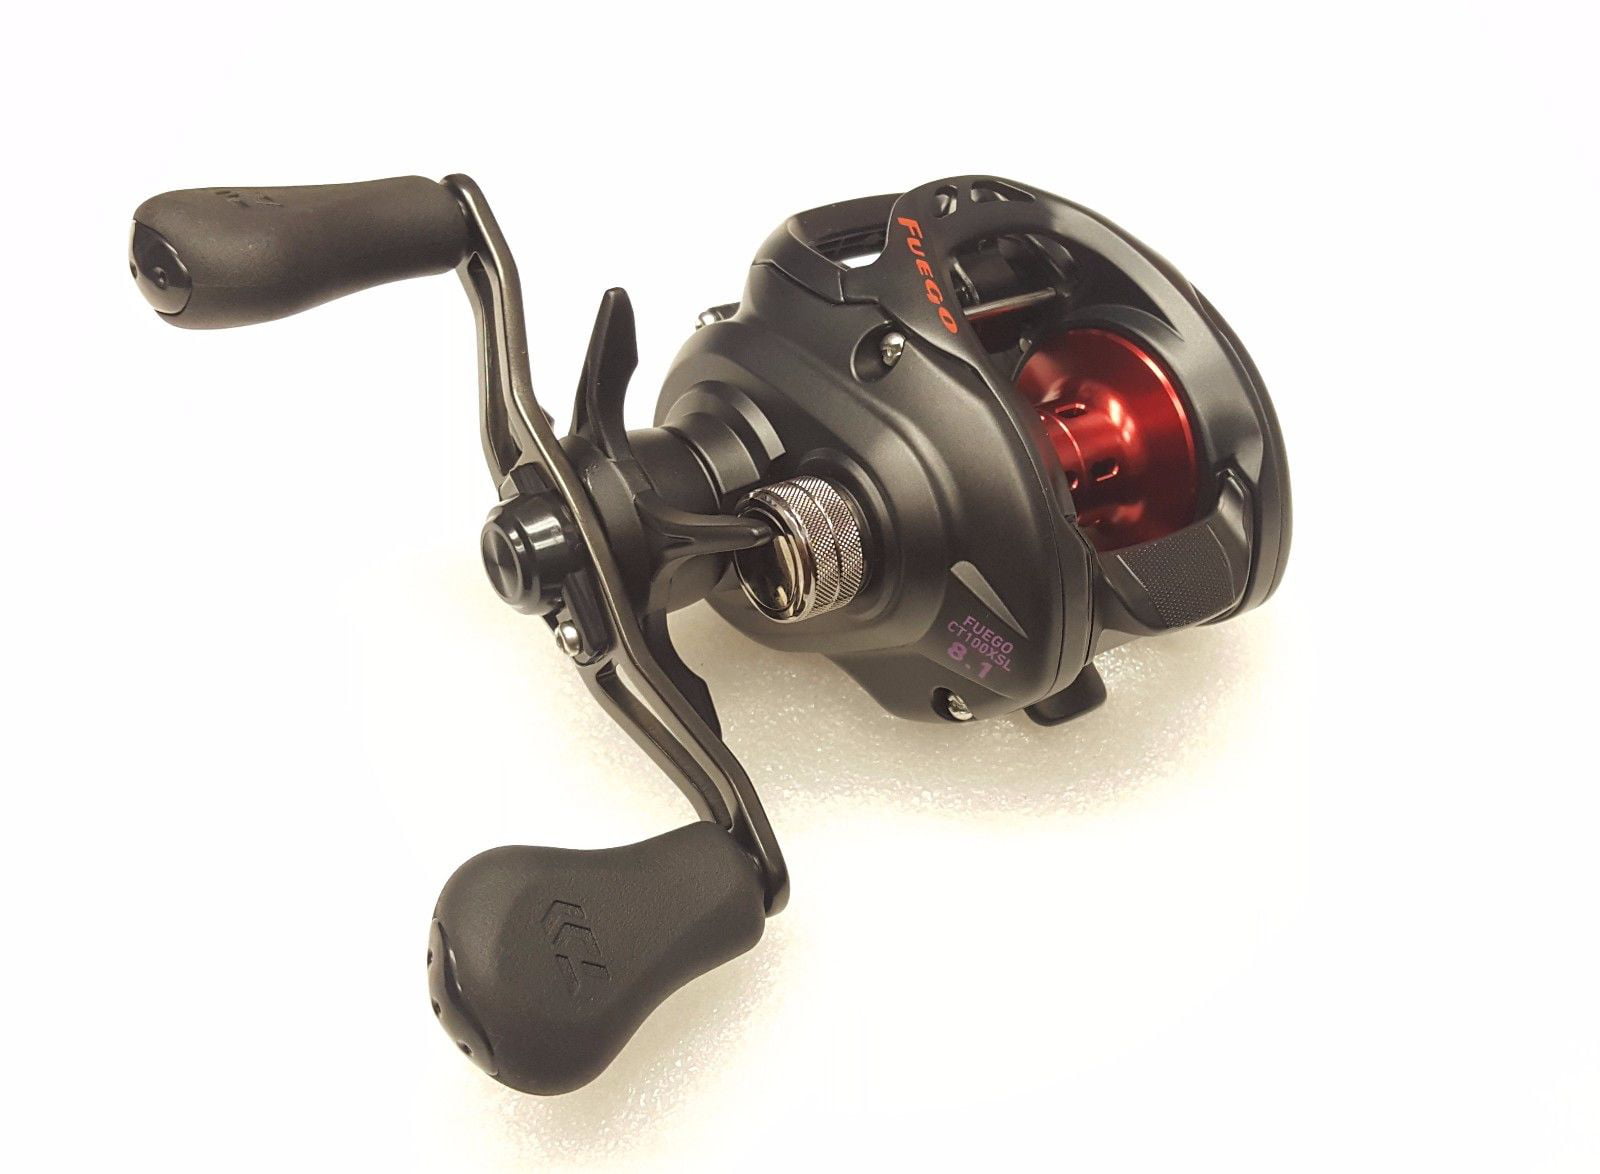 Daiwa Fuego CT FGCT100XS Right-Handed Baitcasting Reel for sale online